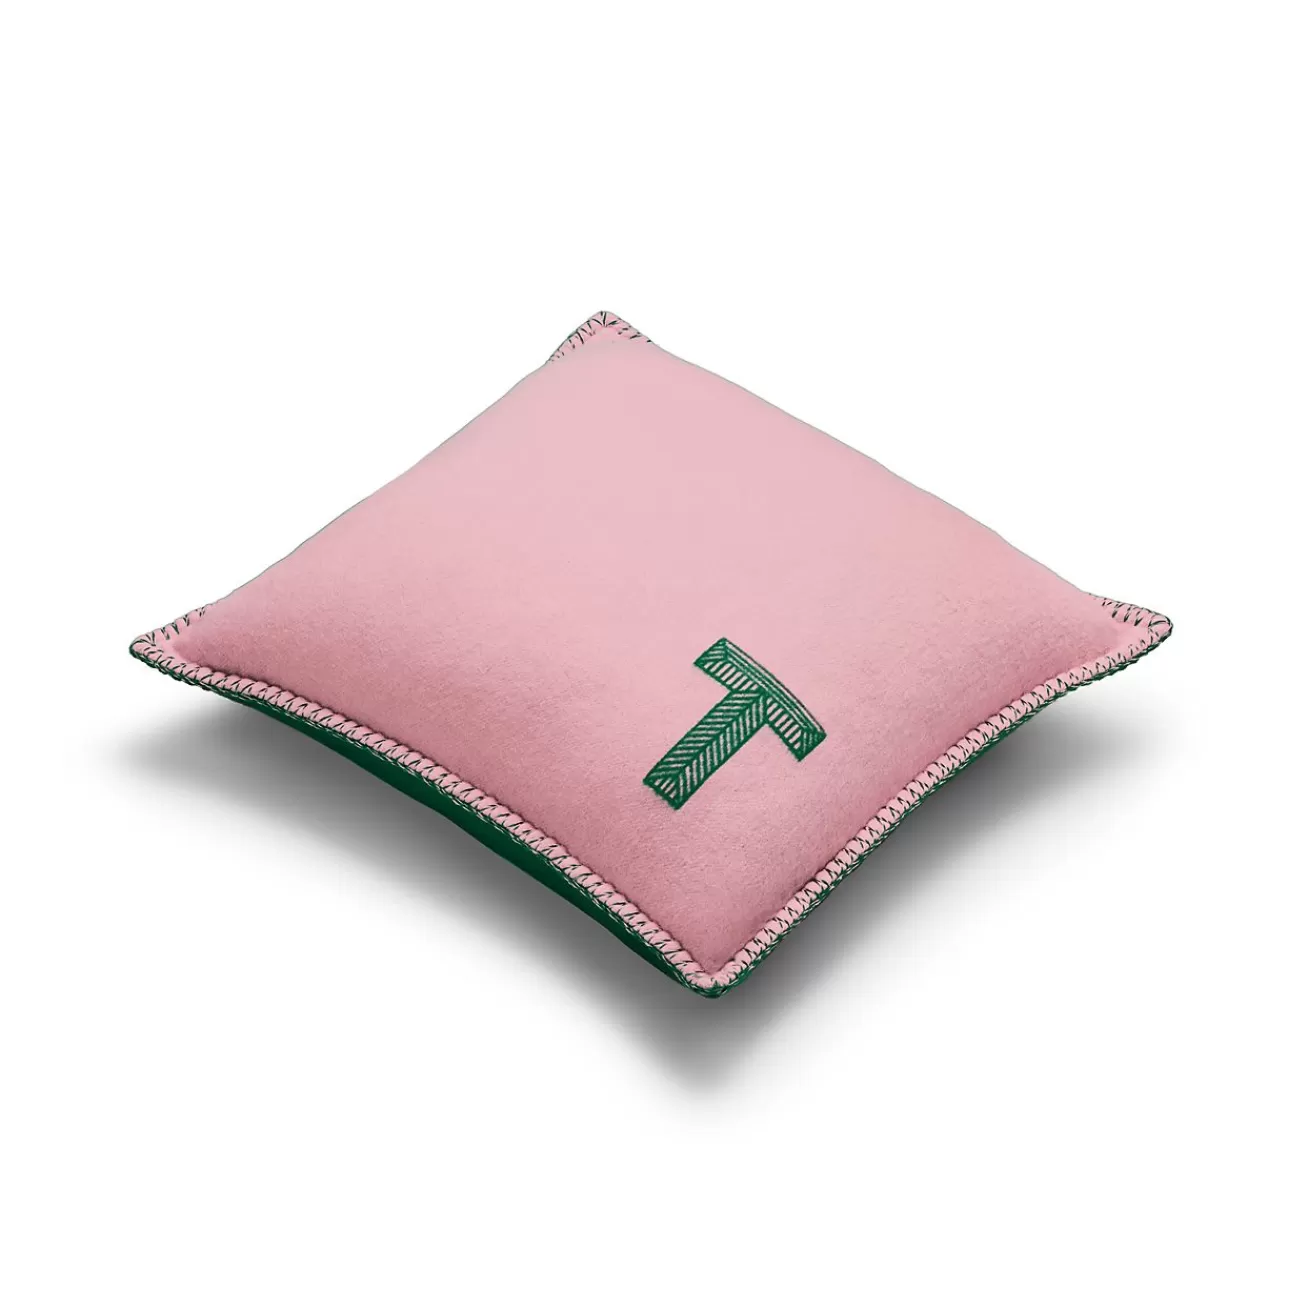 Tiffany & Co. Color Block Cushion in Emerald Green and Morganite Pink Cashmere and Wool | ^ The Home | Housewarming Gifts